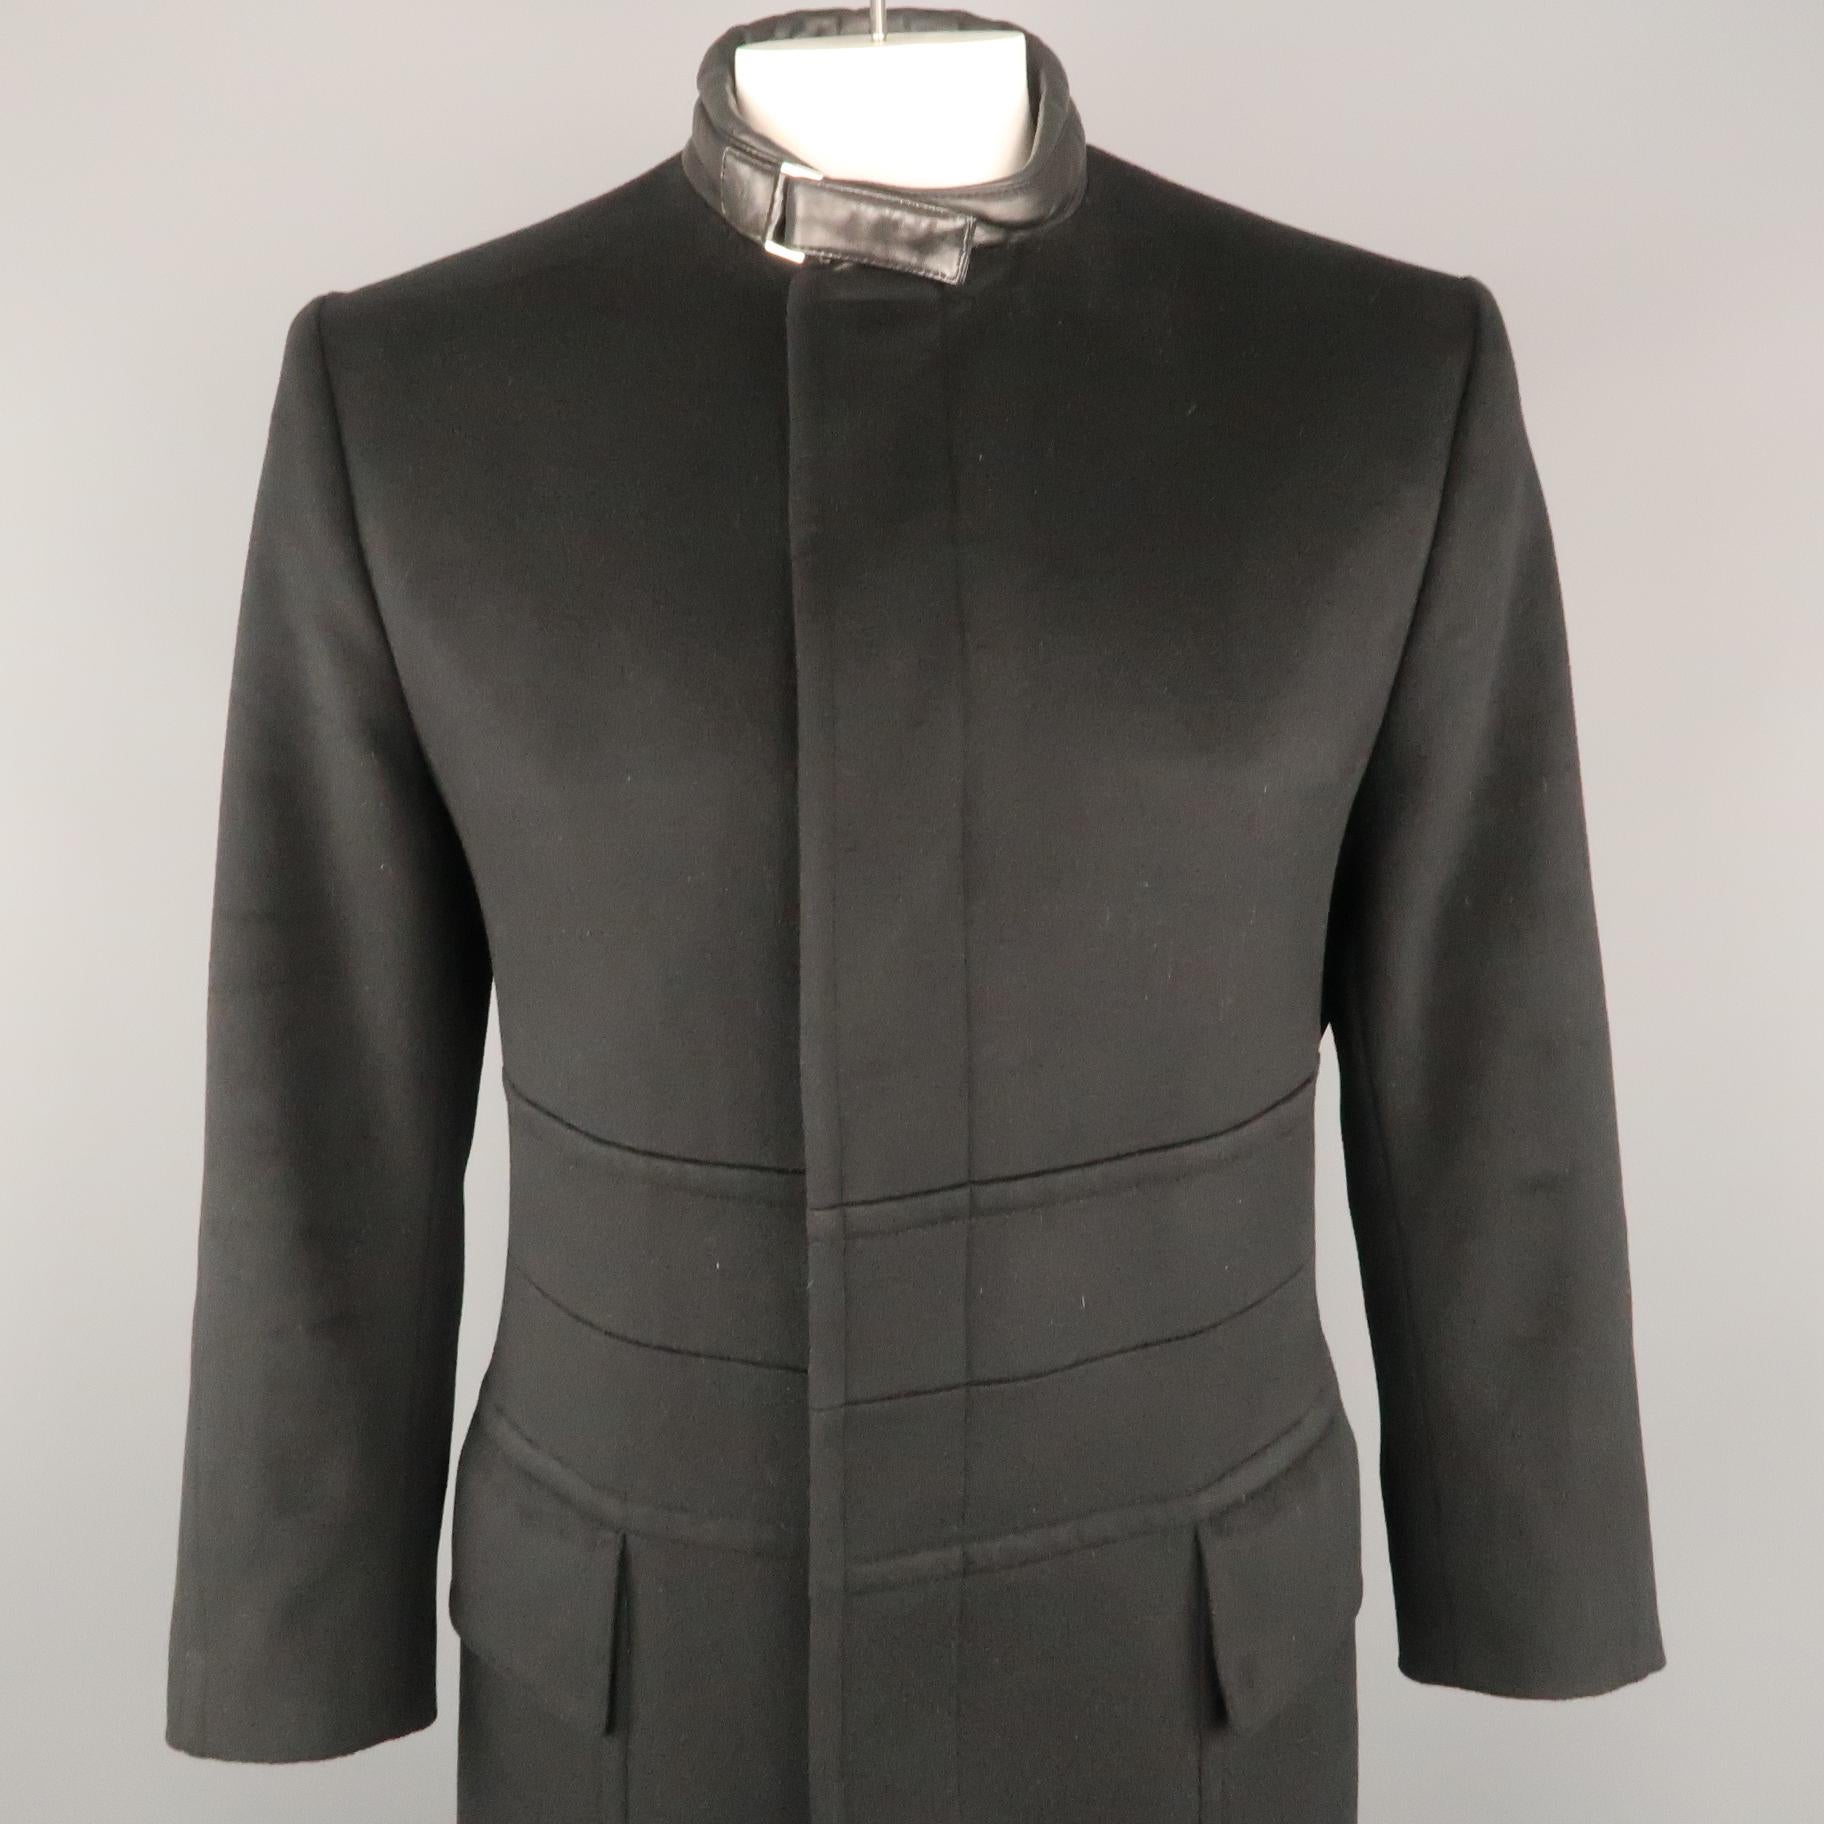 Archive GUCCI by TOM FORD coat comes in a wool cashmere blend fabric with a hidden placket button front, patch flap pockets, and padded leather band collar with buckle and snap tab closure. Made in Italy.
 
Excellent Pre-Owned Condition.
Marked: IT